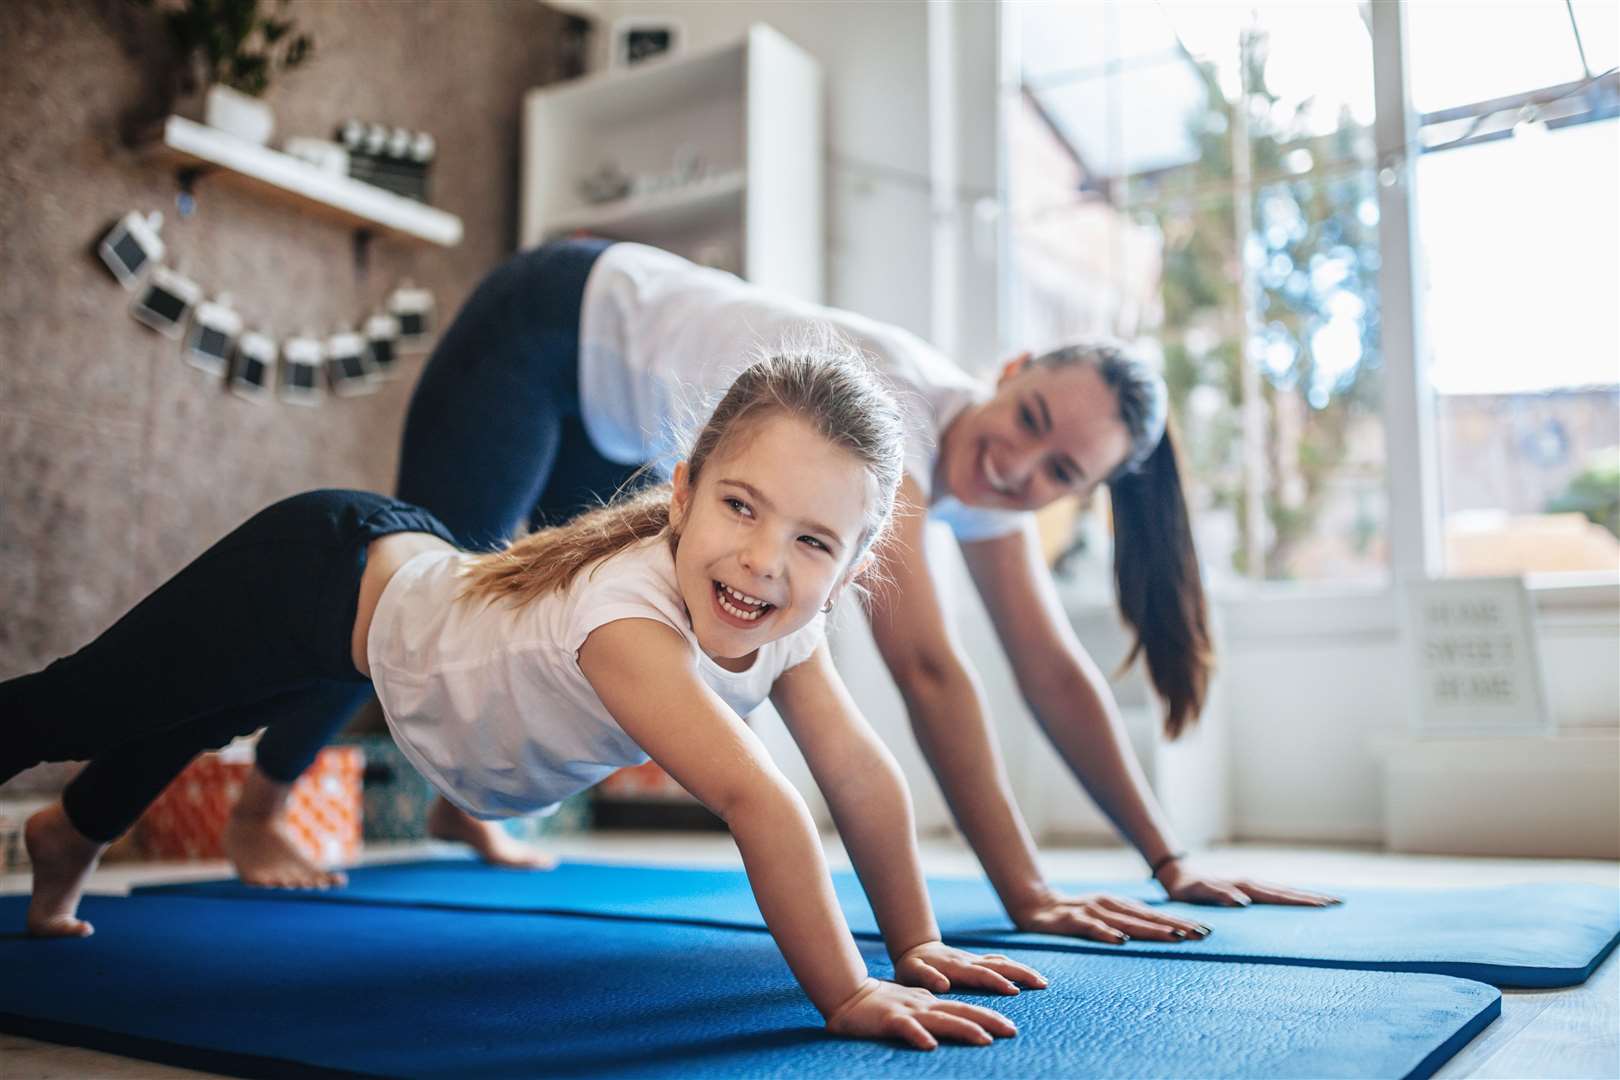 Parents are being encouraged to break the hour of activity into more manageable chunks. Photo: Stock image.